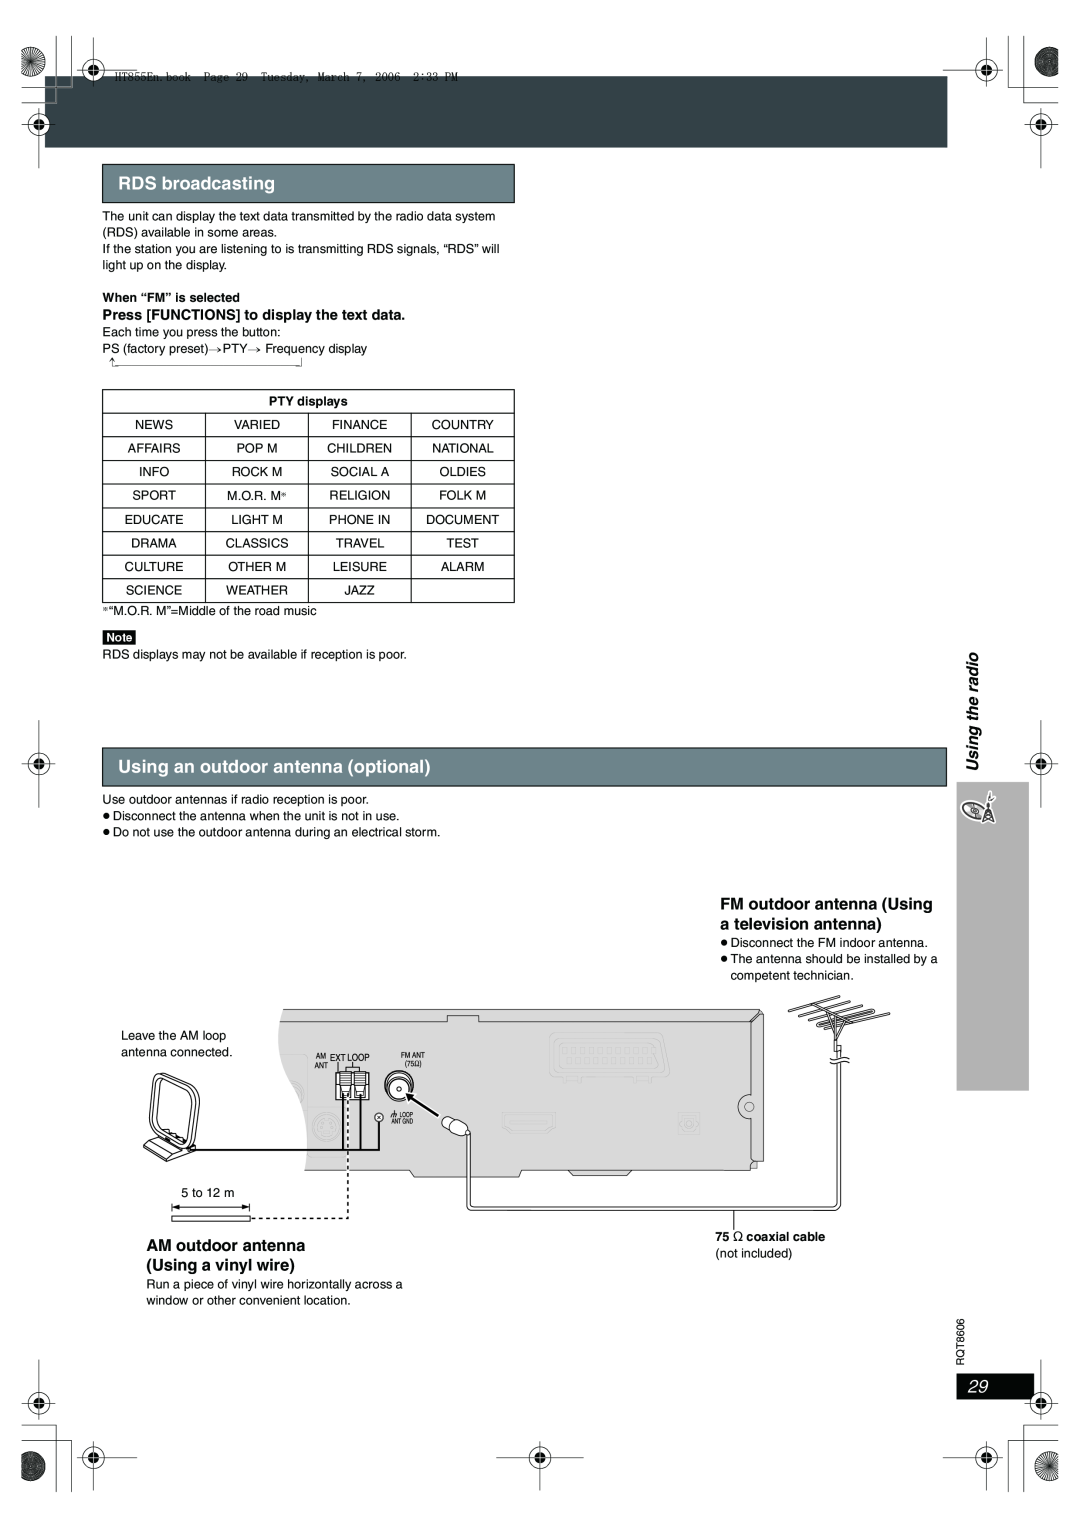 Panasonic SC-HT855 manual RDS broadcasting, Using an outdoor antenna optional, AM outdoor antenna Using a vinyl wire 